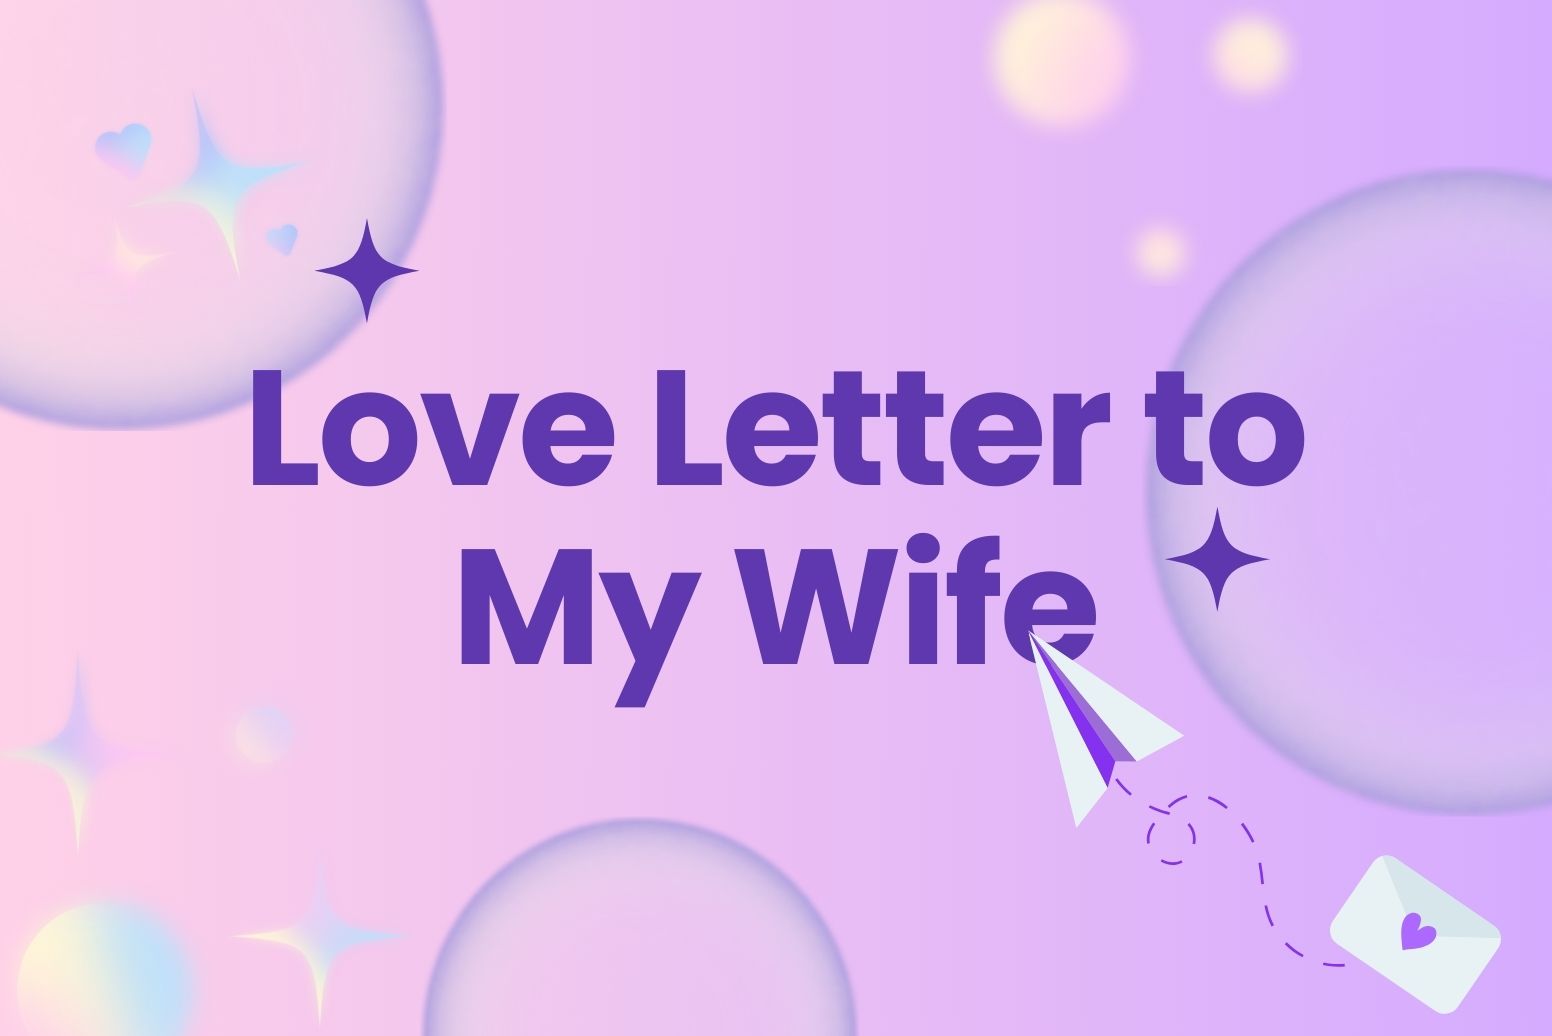 Love Letters to My Wife